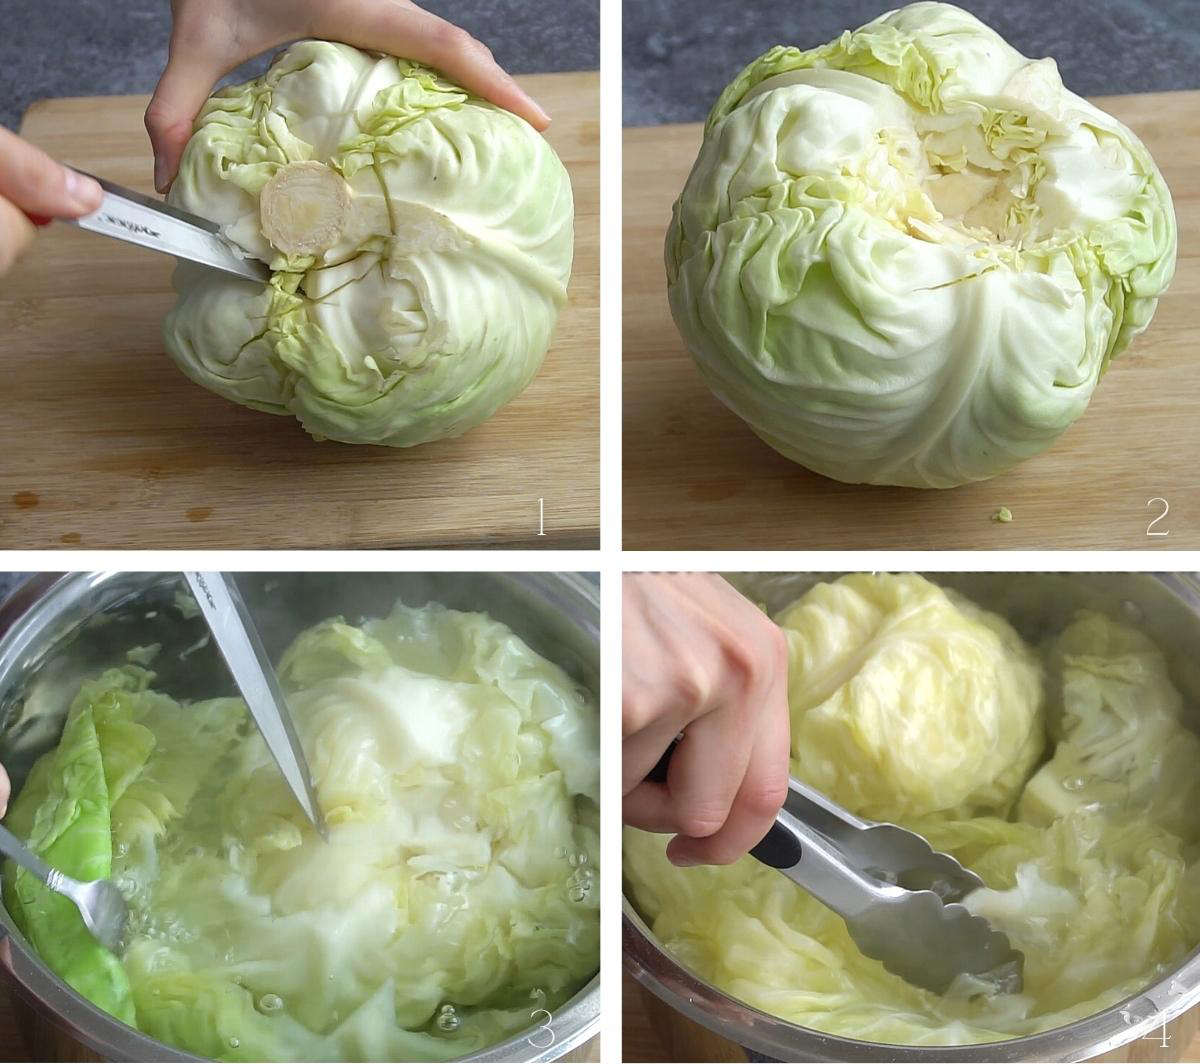 Process shots showing how to prepare cabbage for cabbage rolls by softening cabbage leaves in boiling water.